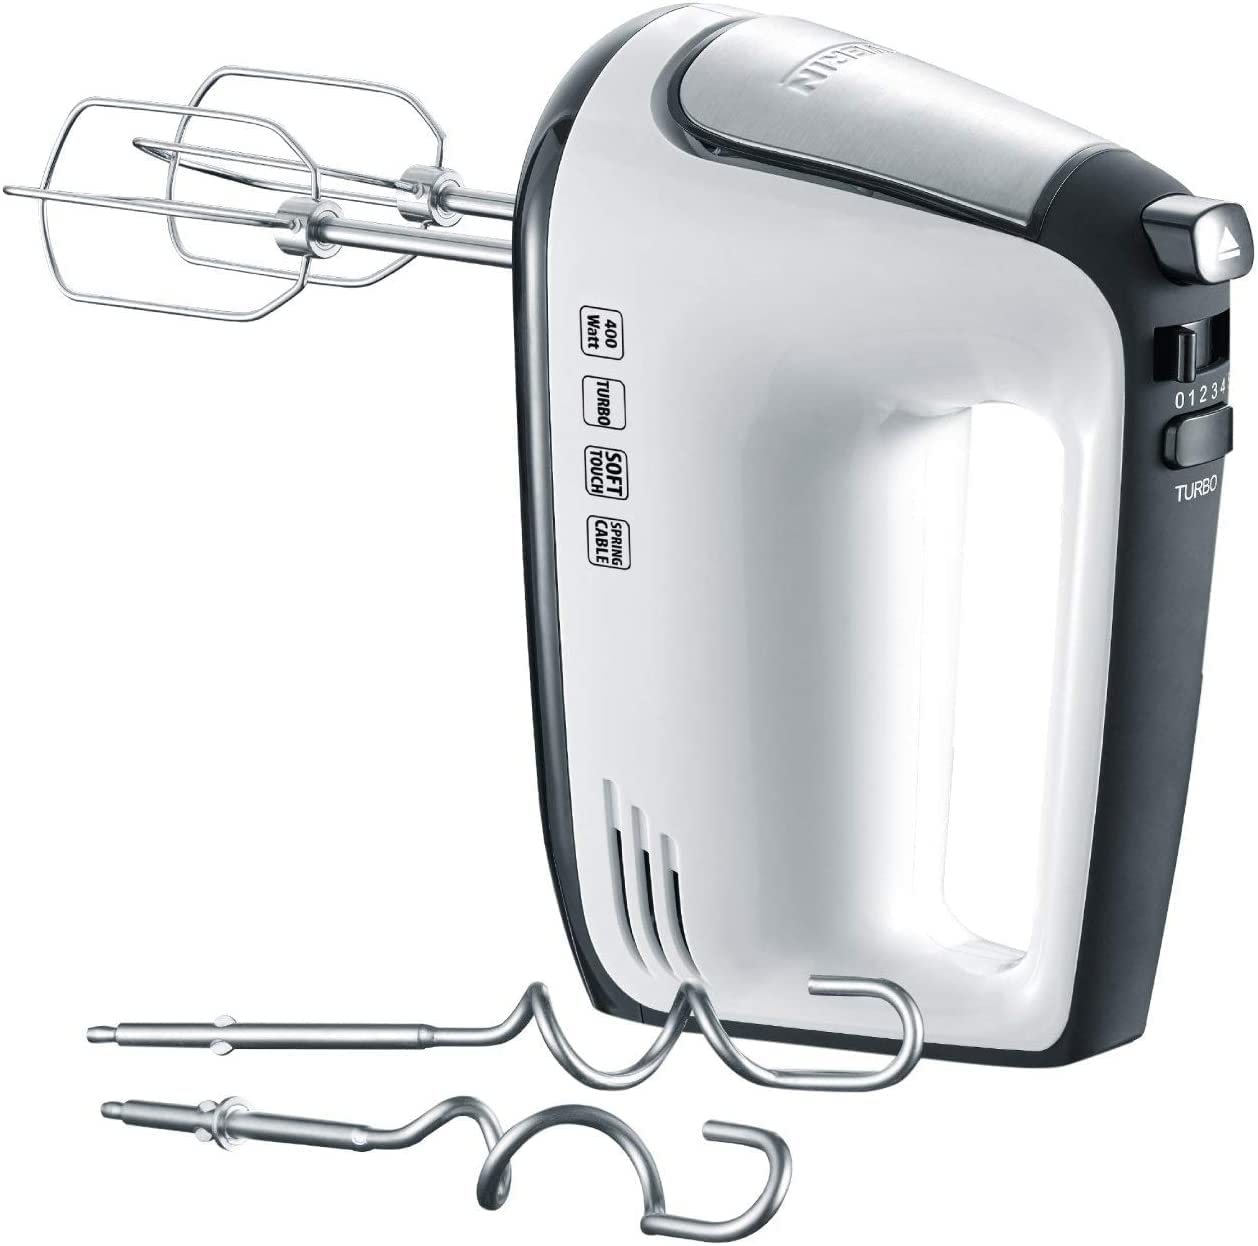 SEVERIN Hand Mixer with Spiral Cable, Approx. 400 W, HM 3830, 28.5, Stainless steel / white